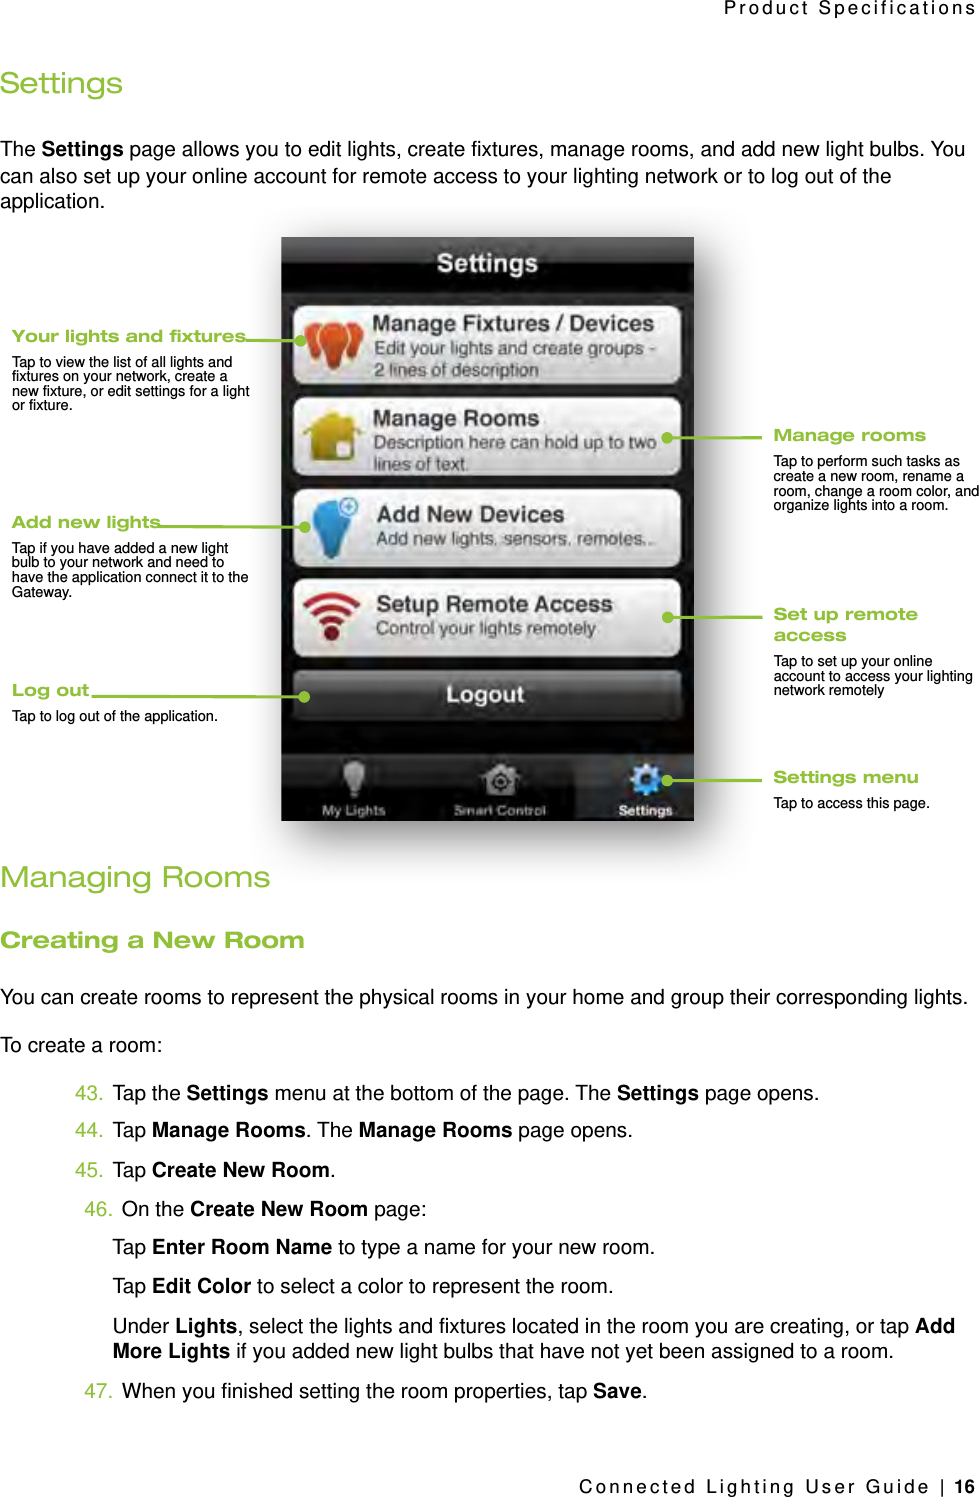 SettingsThe Settings page allows you to edit lights, create fixtures, manage rooms, and add new light bulbs. You can also set up your online account for remote access to your lighting network or to log out of the application.Managing RoomsCreating a New RoomYou can create rooms to represent the physical rooms in your home and group their corresponding lights. To create a room:43. Tap the Settings menu at the bottom of the page. The Settings page opens.44. Tap Manage Rooms. The Manage Rooms page opens.45. Tap Create New Room.46. On the Create New Room page:Tap Enter Room Name to type a name for your new room.Tap Edit Color to select a color to represent the room.Under Lights, select the lights and fixtures located in the room you are creating, or tap Add More Lights if you added new light bulbs that have not yet been assigned to a room.47. When you finished setting the room properties, tap Save.Product SpecificationsConnected Lighting User Guide | 16Settings menuTap to access this page.Set up remote accessTap to set up your online account to access your lighting network remotely Manage roomsTap to perform such tasks as create a new room, rename a room, change a room color, and organize lights into a room.Your lights and xturesTap to view the list of all lights and fixtures on your network, create a new fixture, or edit settings for a light or fixture.Add new lightsTap if you have added a new light bulb to your network and need to have the application connect it to the Gateway.Log outTap to log out of the application.